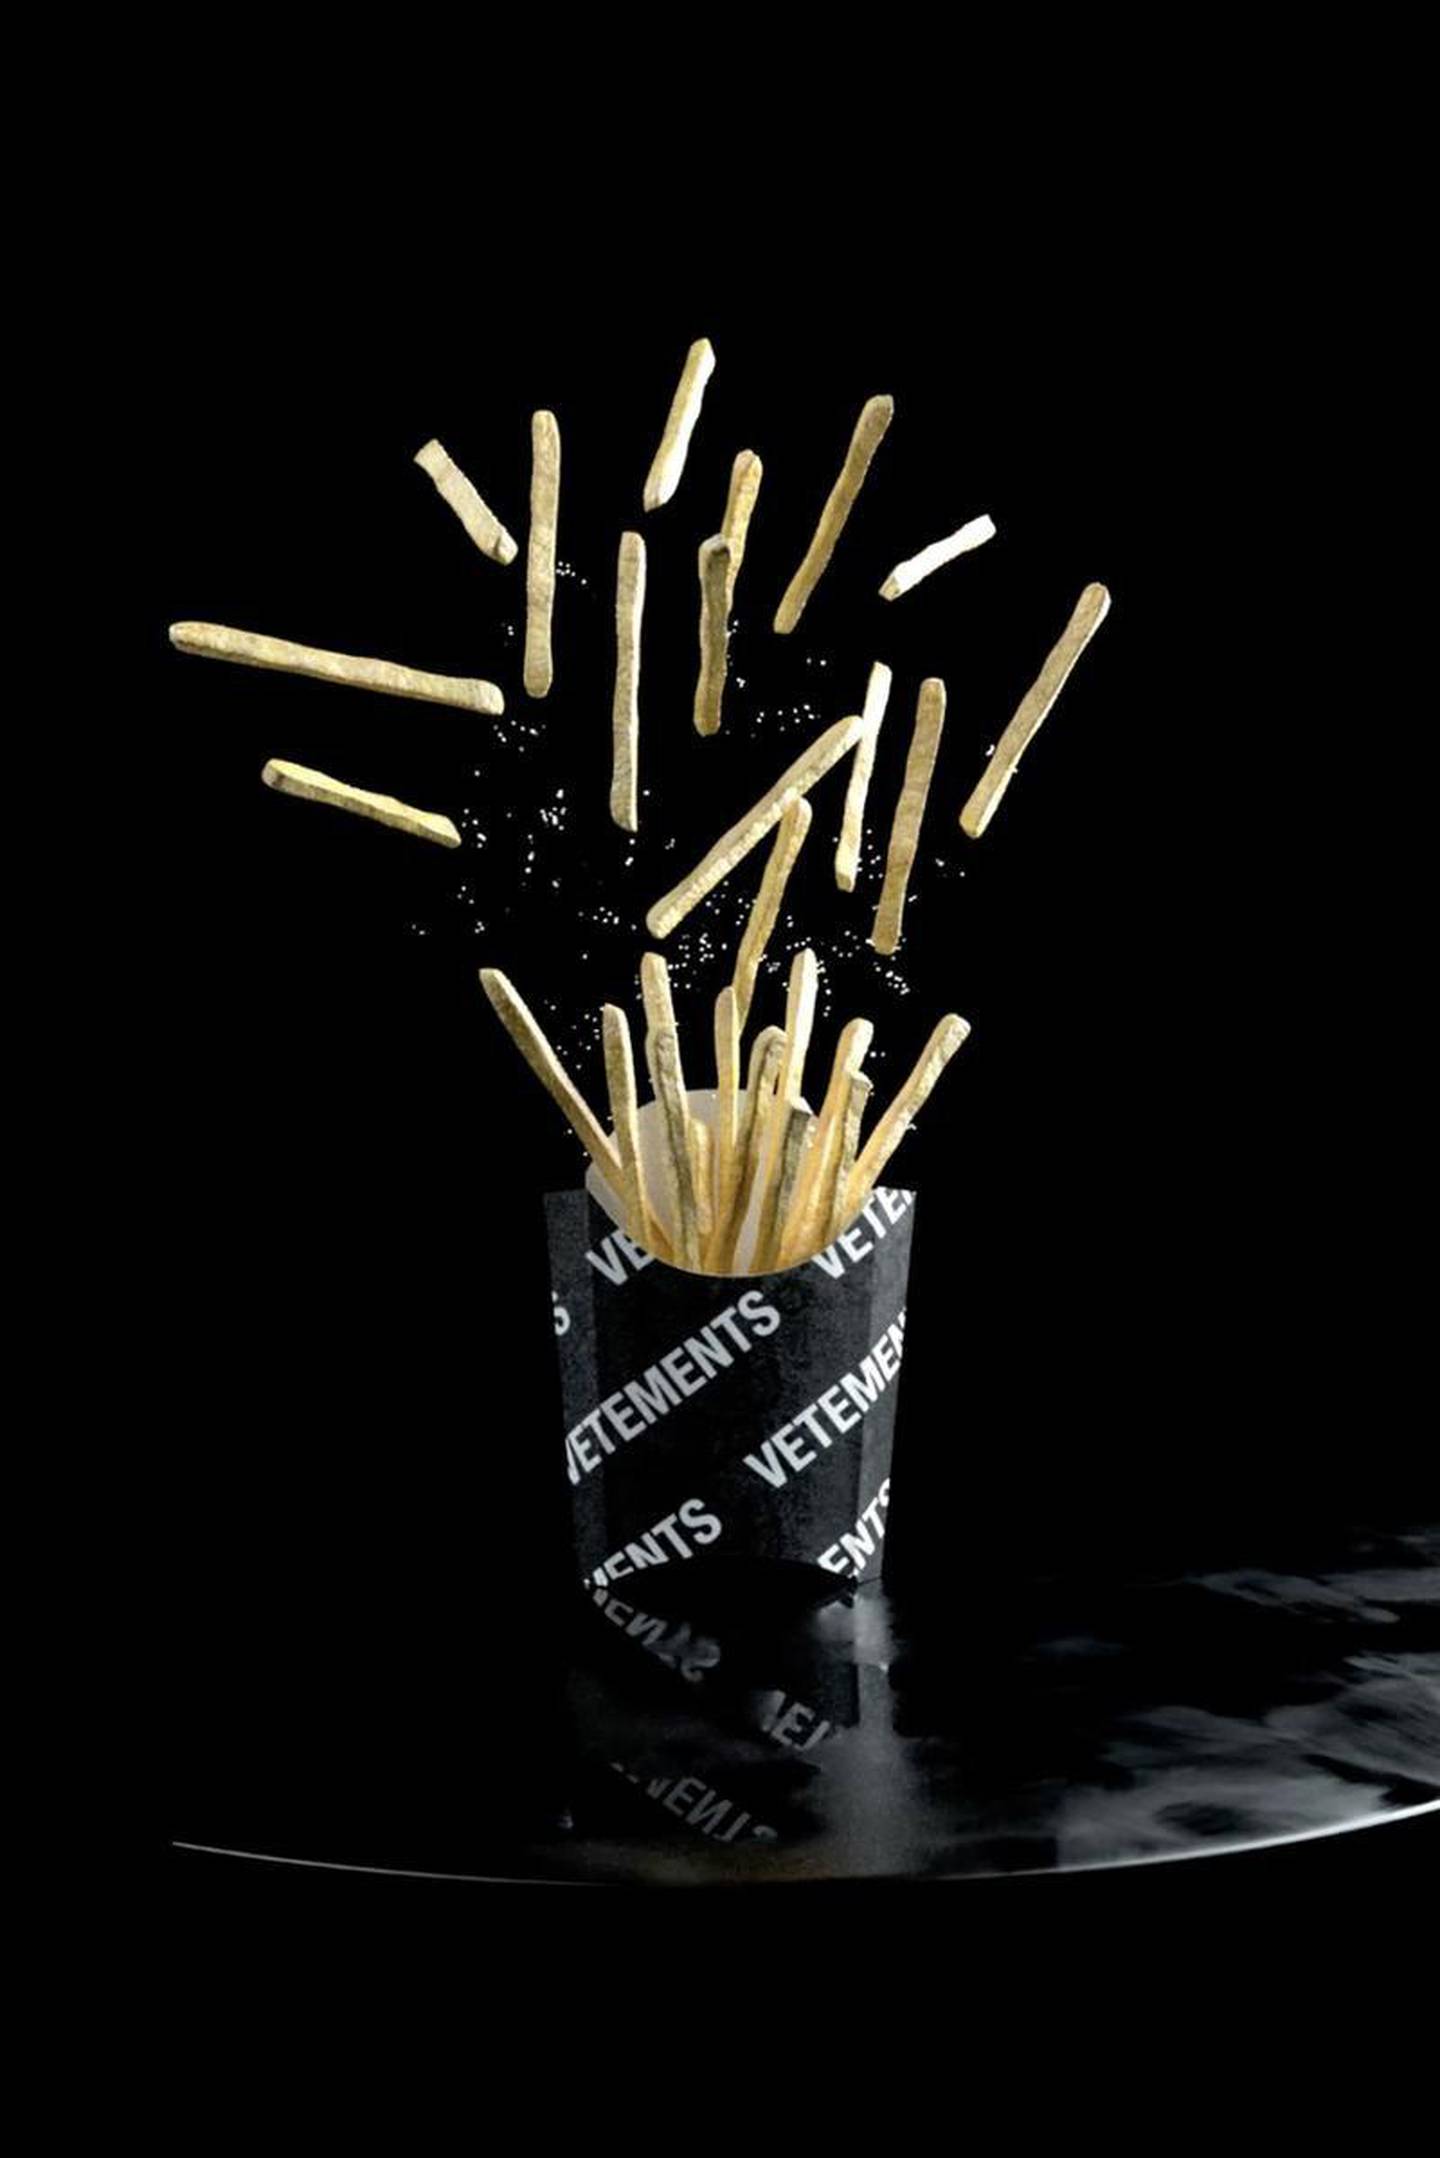 Vetements fries, designed with collaboration with Moscow store KM20. Vetements